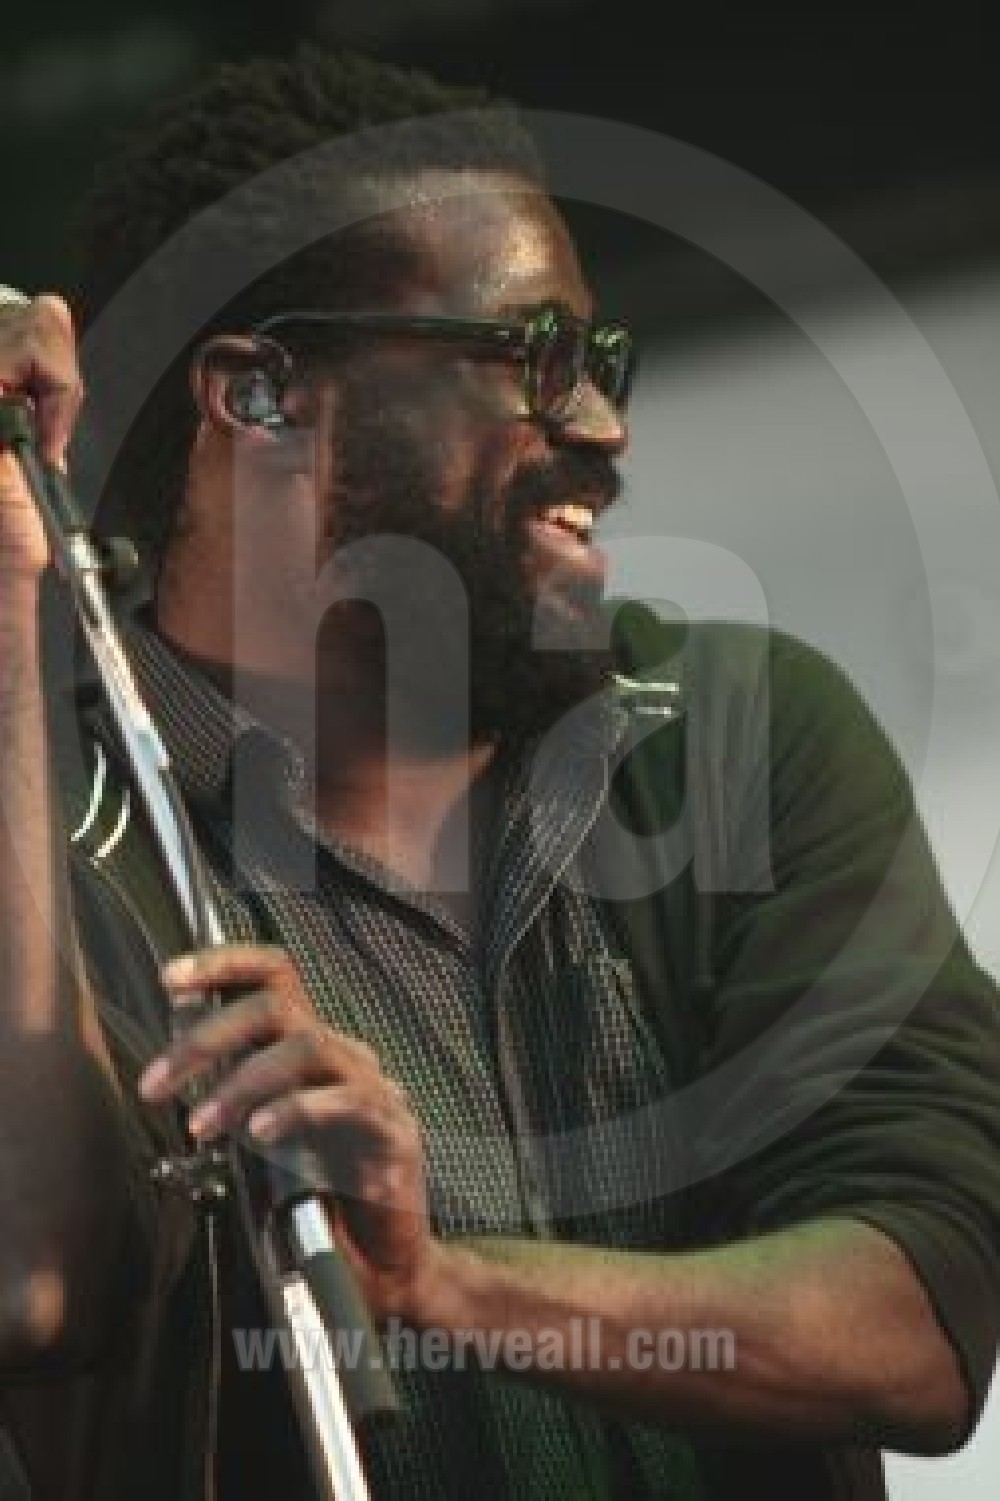 Tunde Adebimpe lauphing